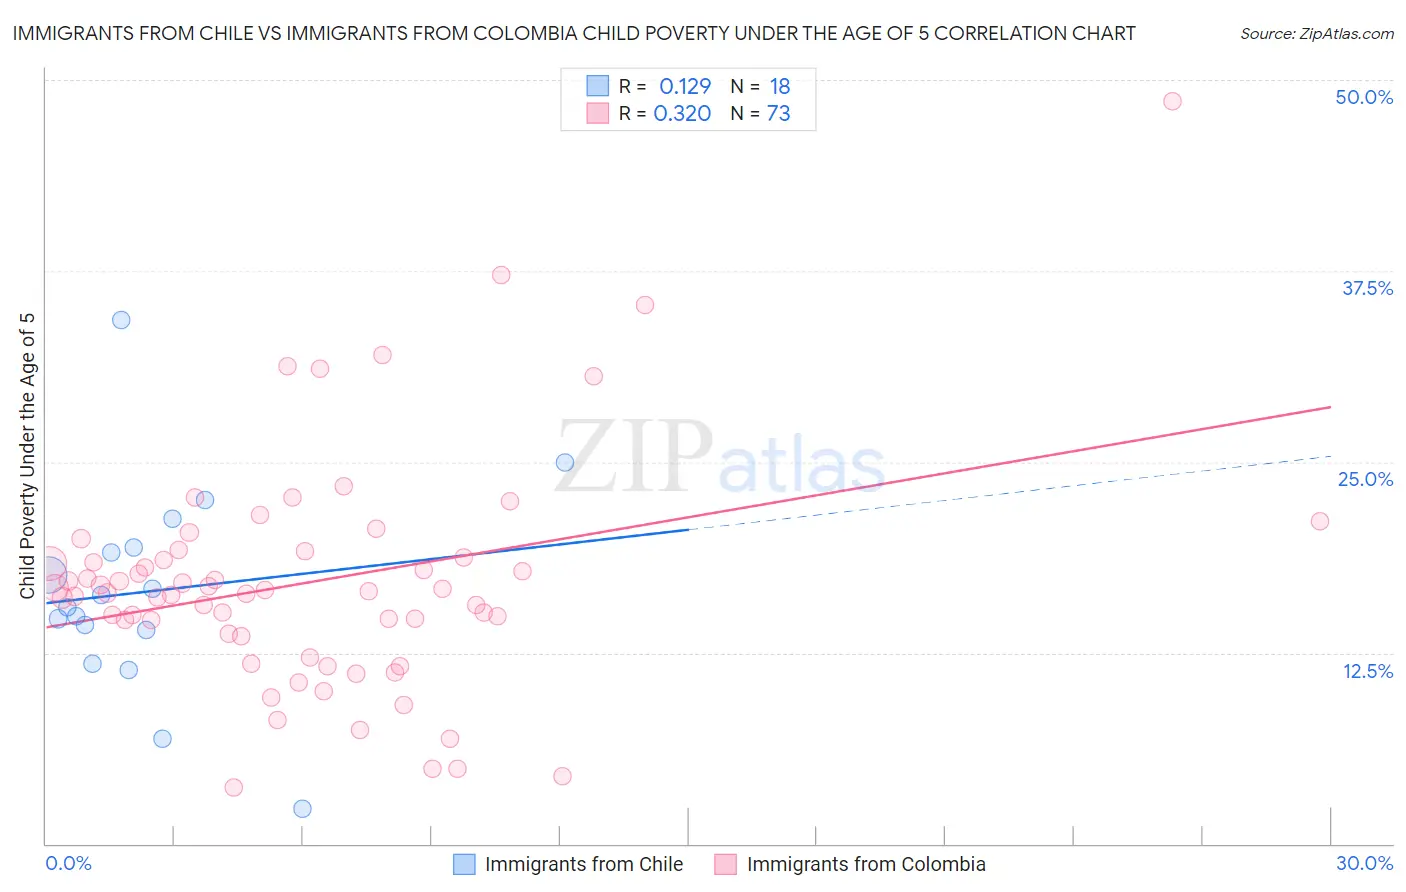 Immigrants from Chile vs Immigrants from Colombia Child Poverty Under the Age of 5